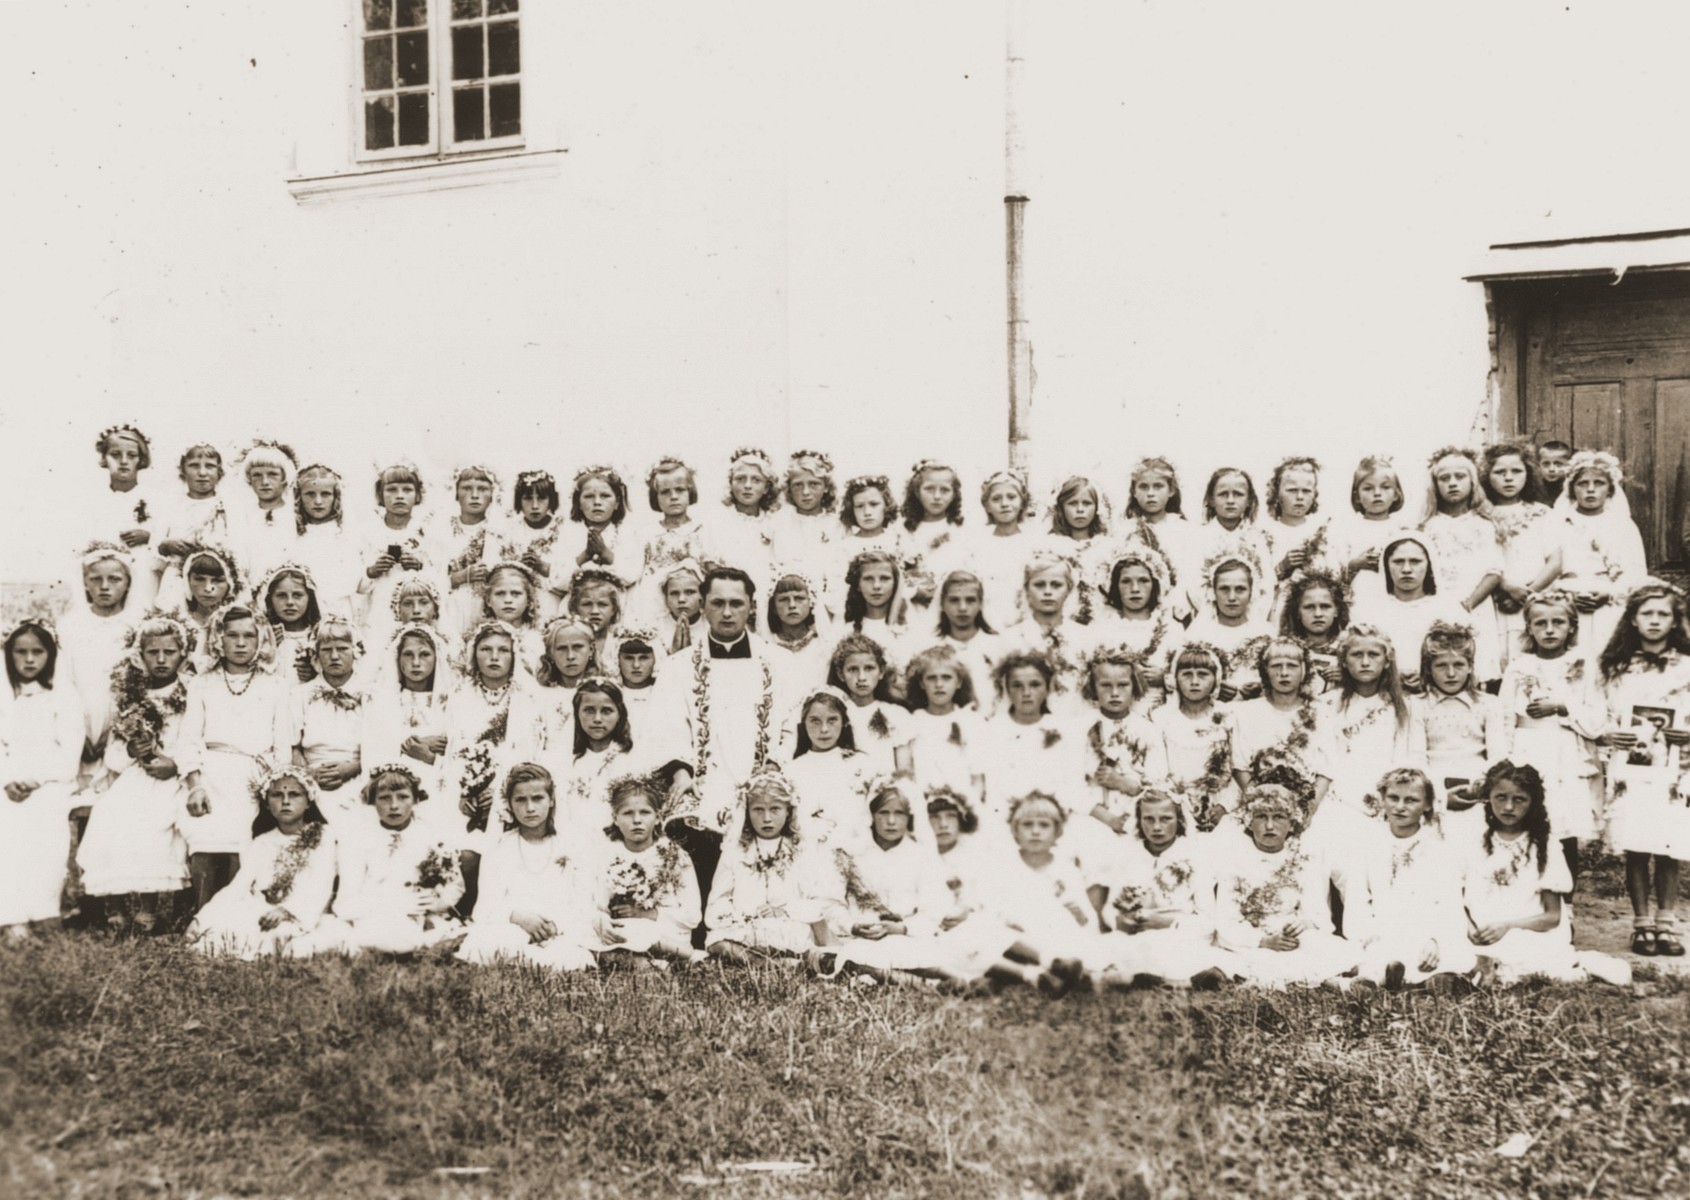 Group portrait of girls at a church school in Wysokie Mazowieckie, Poland, who are dressed for their first communion.  Among the children are twin Jewish sisters who are living in hiding.

The Jewish twins, Celina and Fela Friedmann, are pictured standing in the center of the back row.